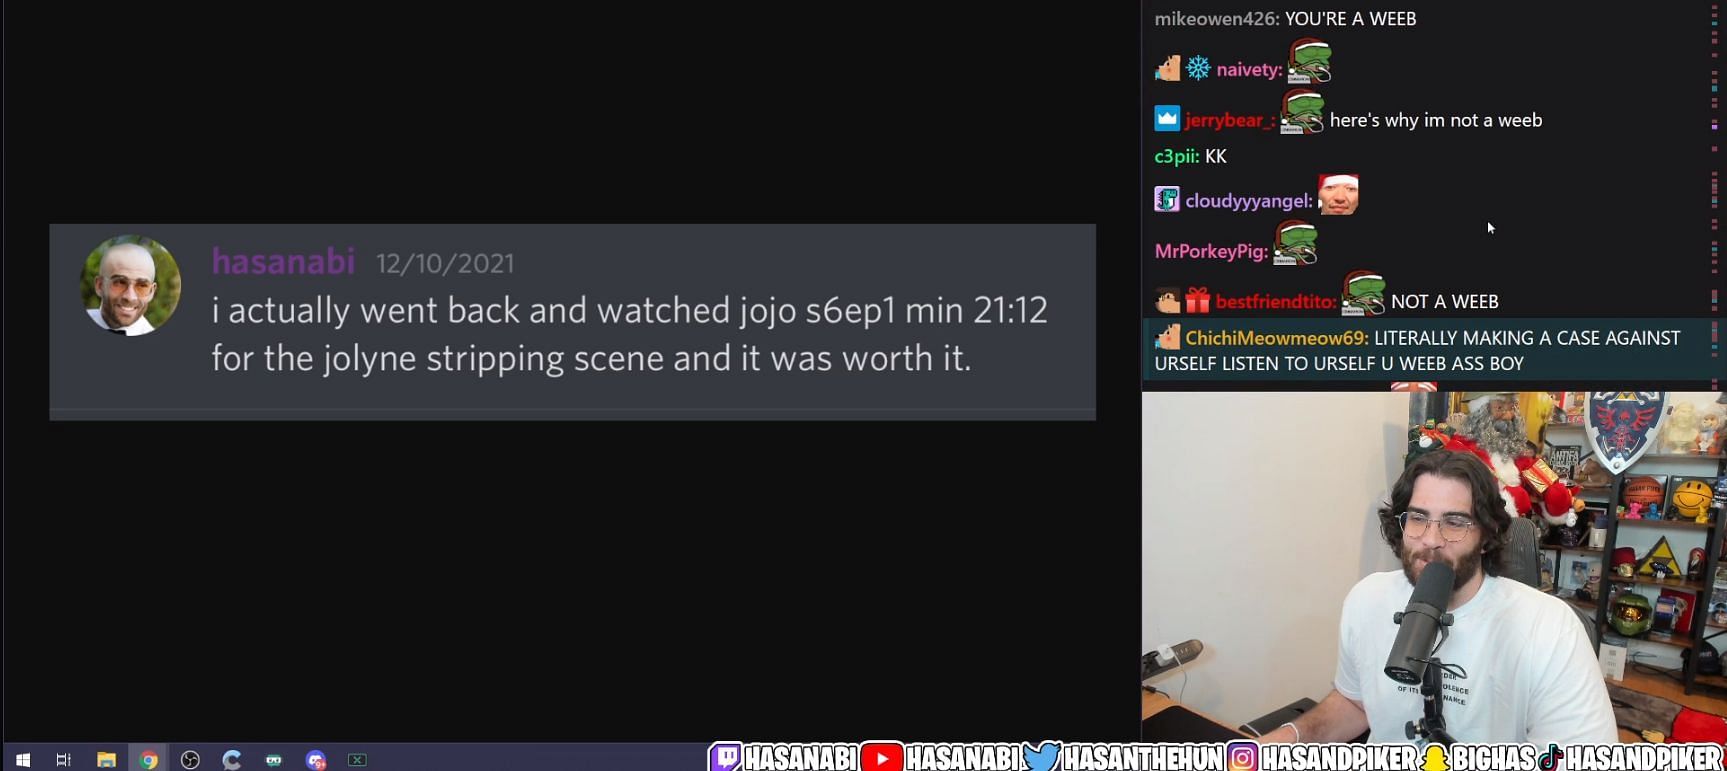 HasanAbi was &lsquo;accused&rsquo; by his Twitch viewers of being a weeb during a recent live stream. (Image via HasanAbi, Twitch)